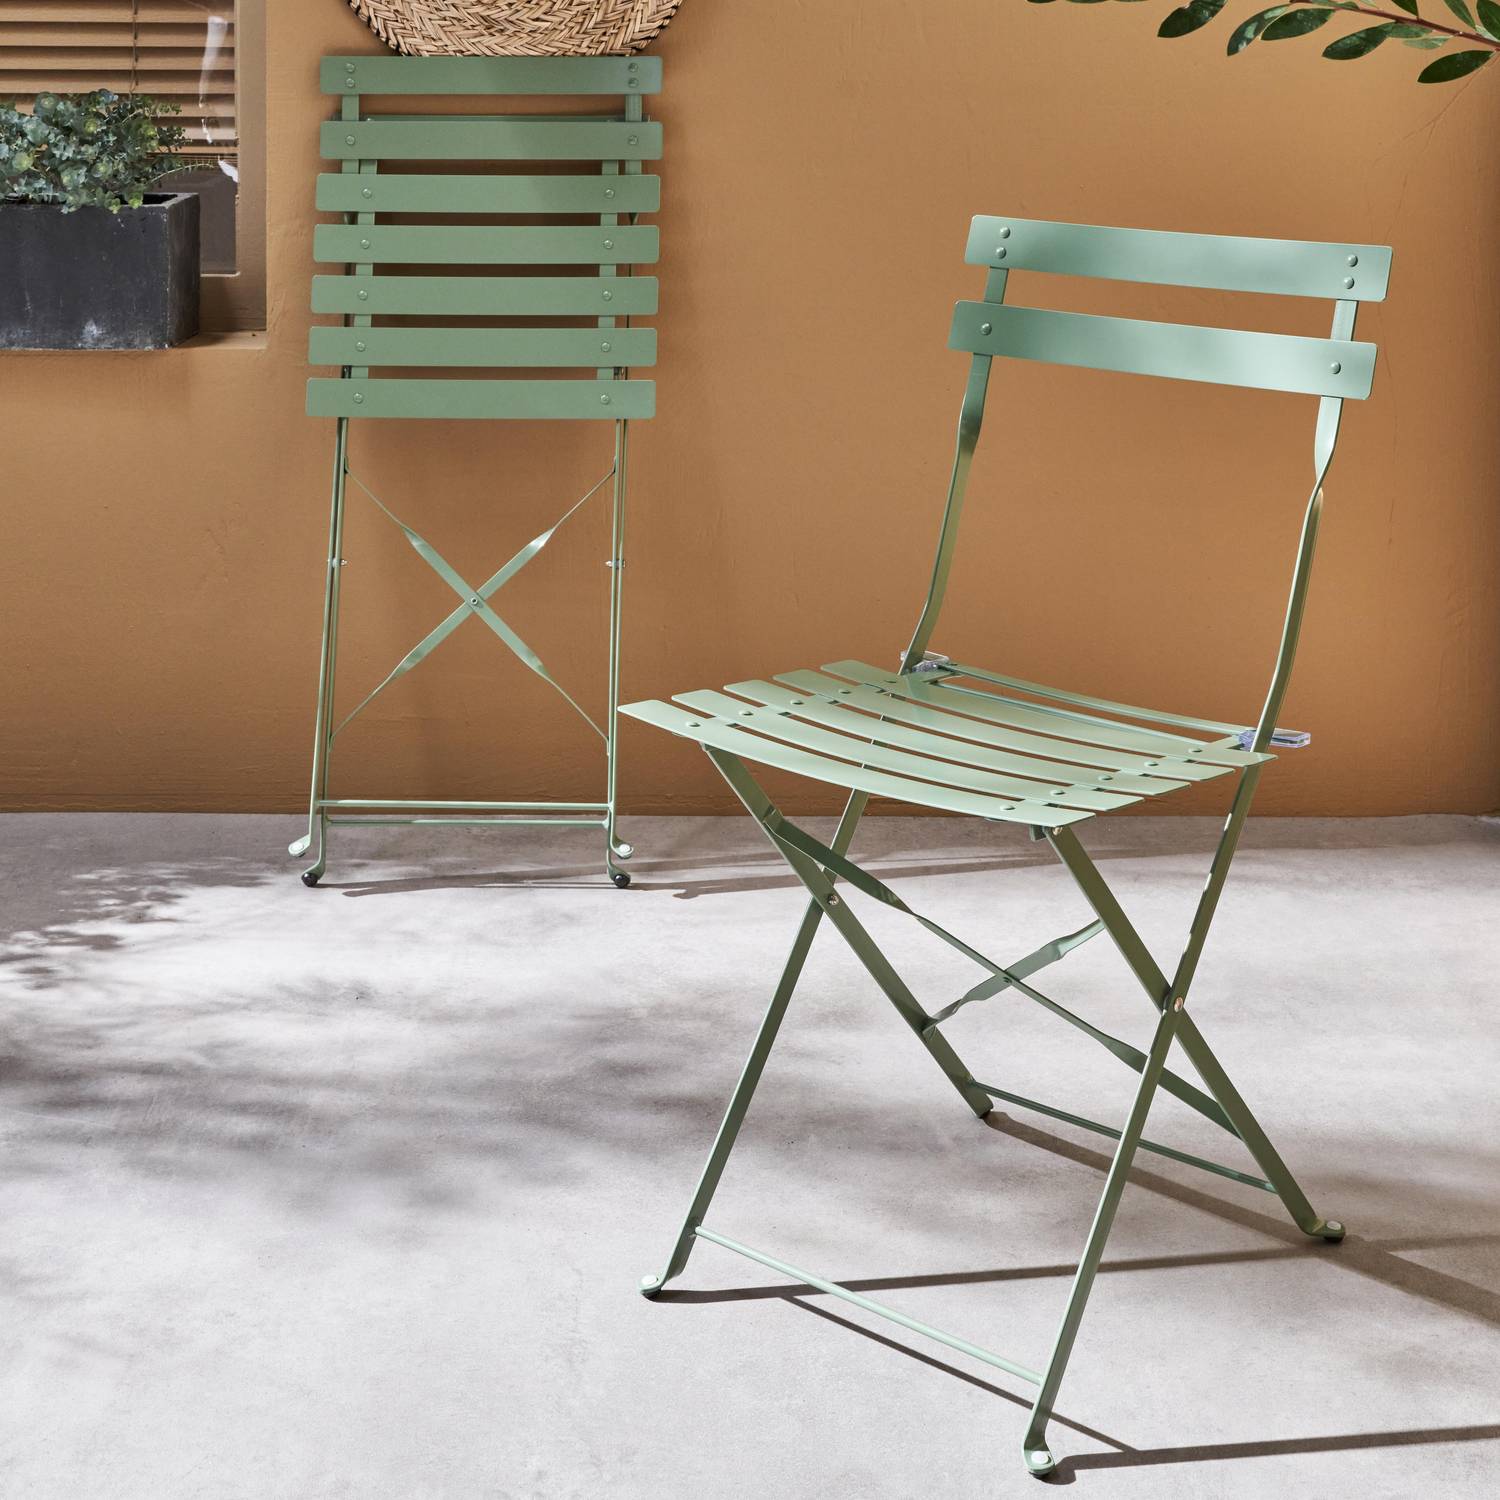 Set of 2 foldable bistro chairs - Emilia sage green - Thermo-lacquered steel Photo2